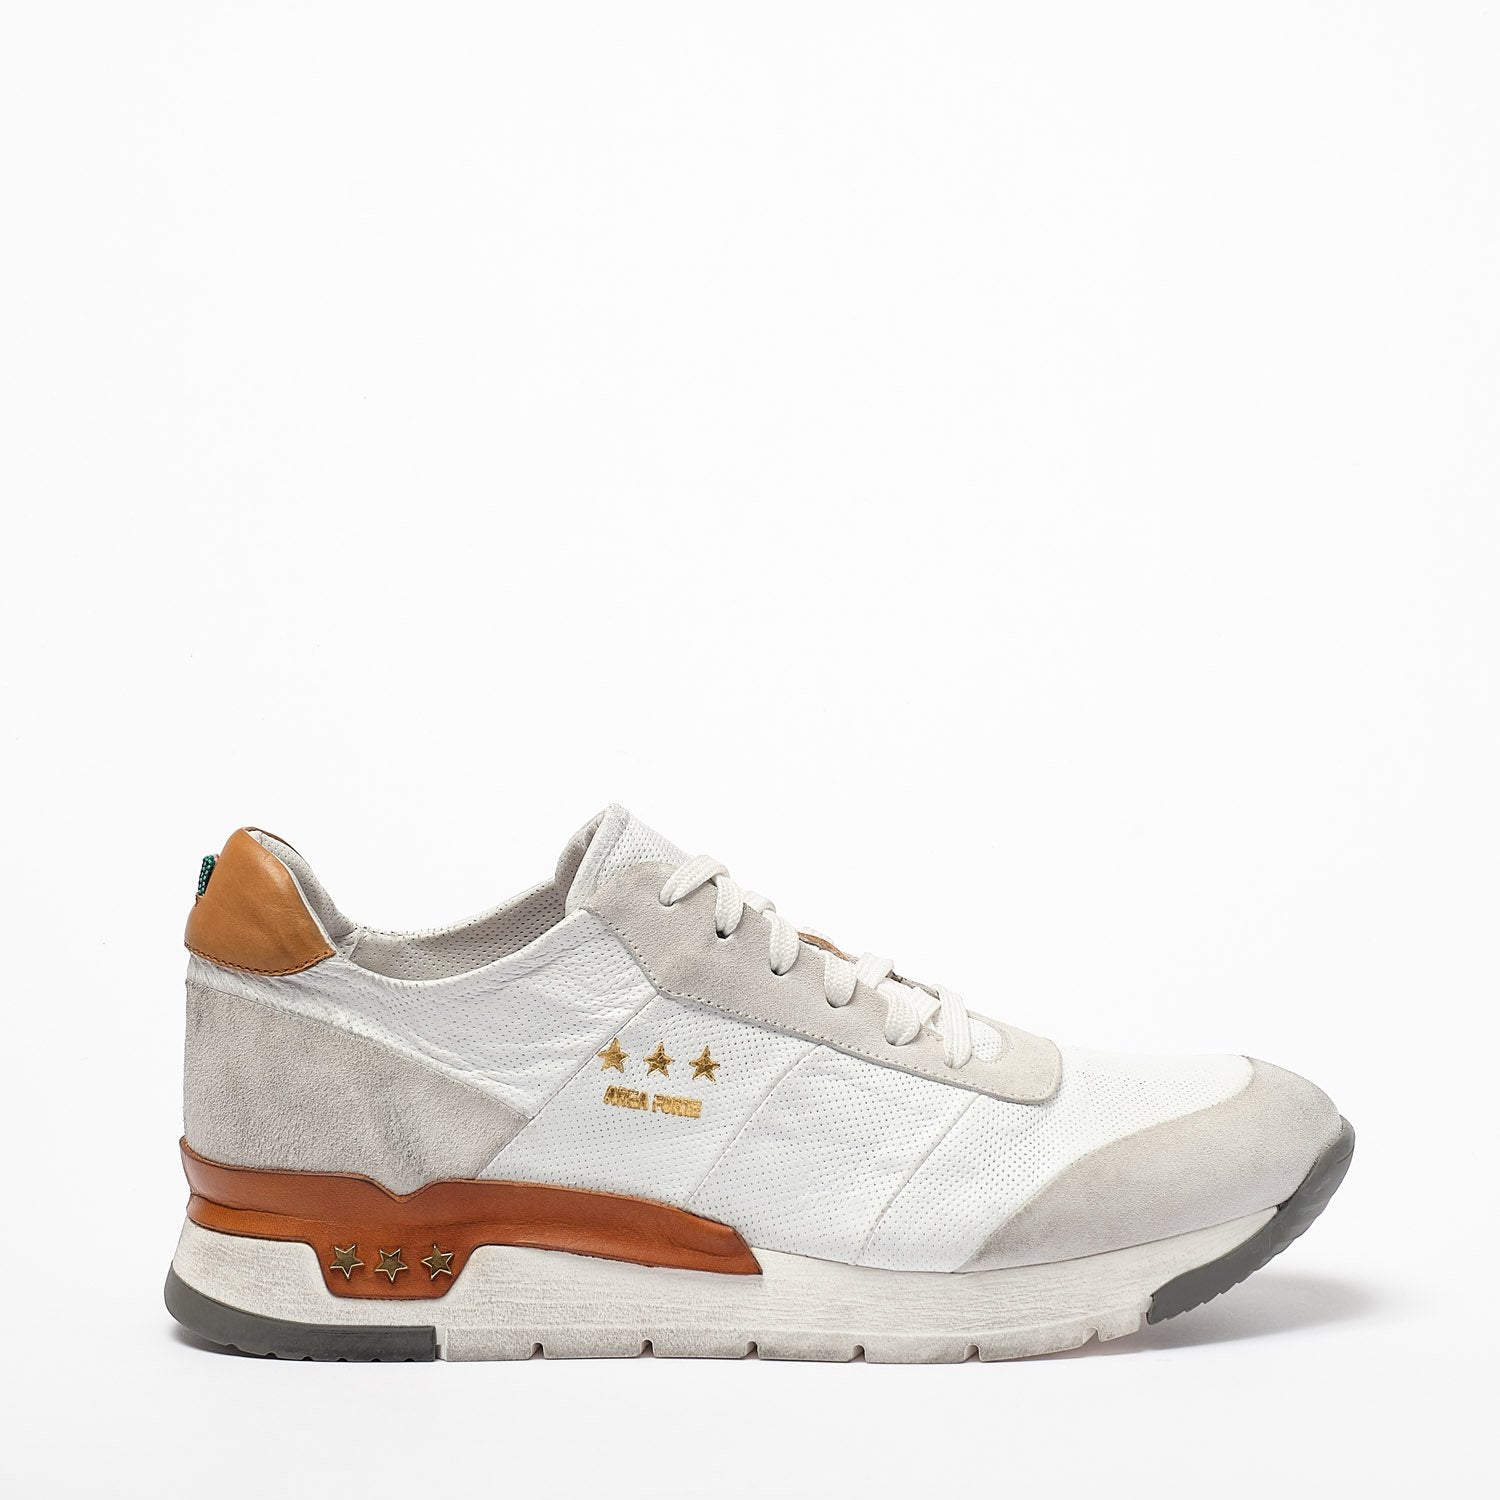 Mundialito Laced Shoes suede and soft leather with vacchetta leather insert white